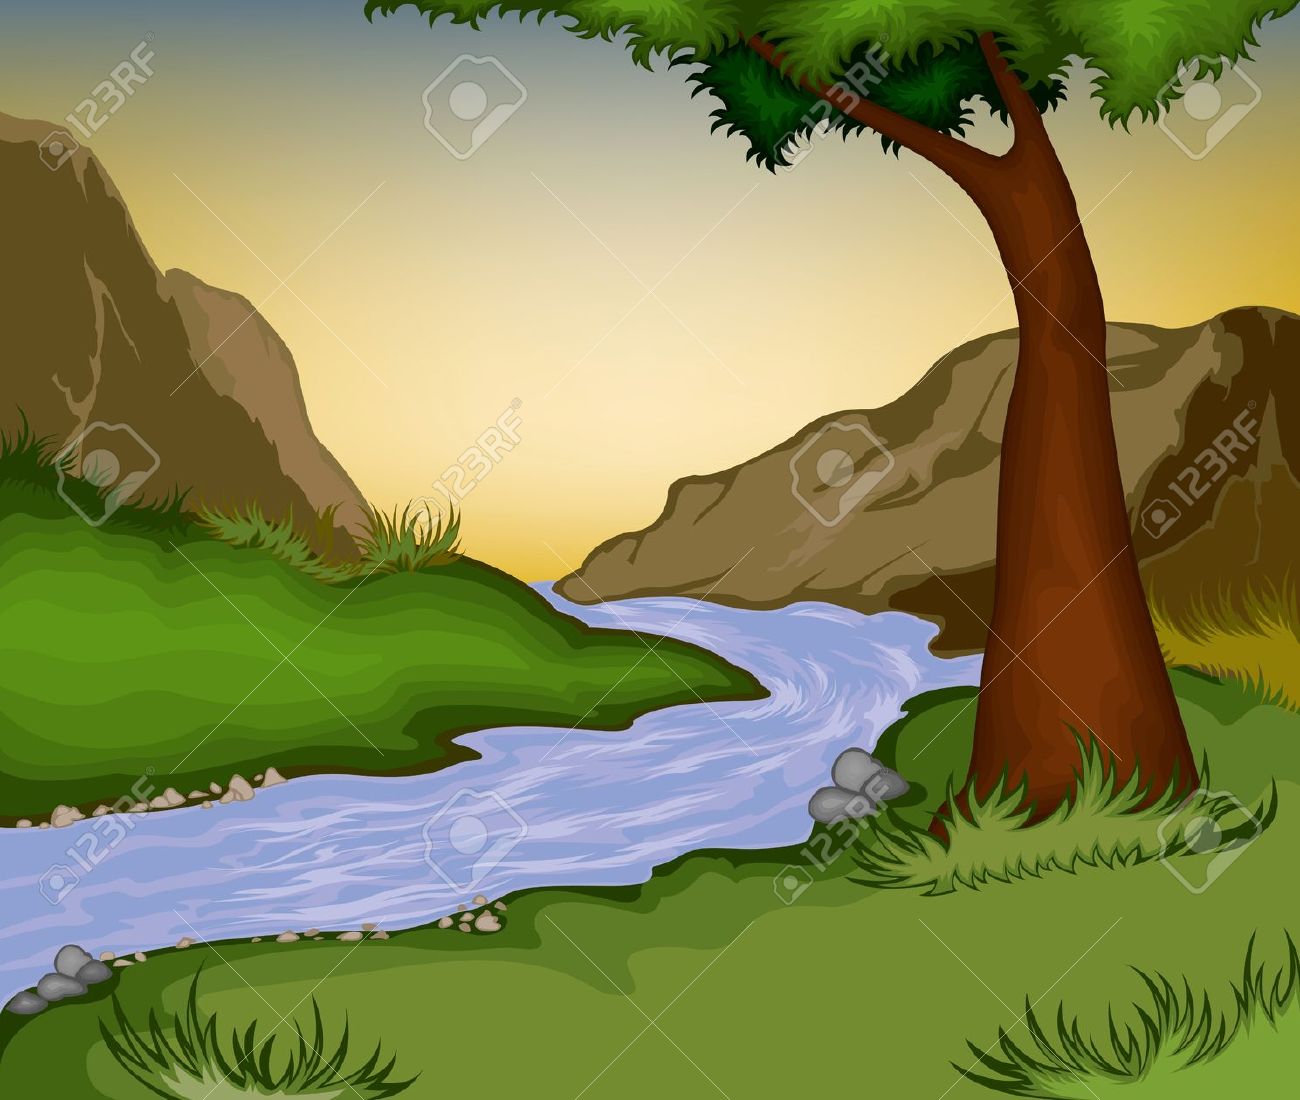 clipart forest background - photo #47